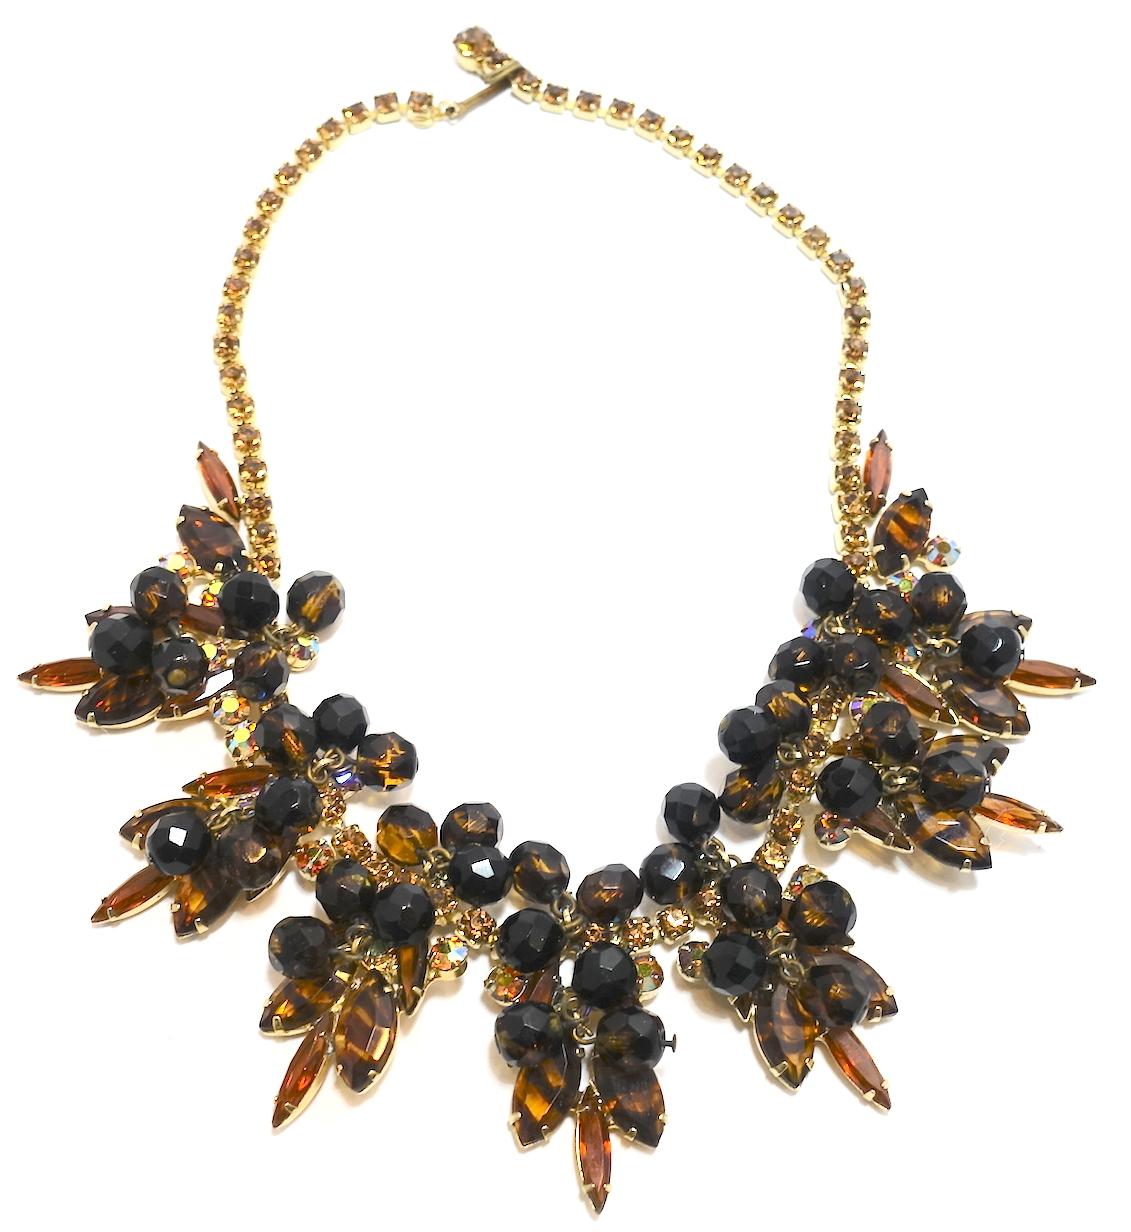 Vintage Topaz Rhinestone Bib Necklace – Juliana? In Excellent Condition For Sale In New York, NY